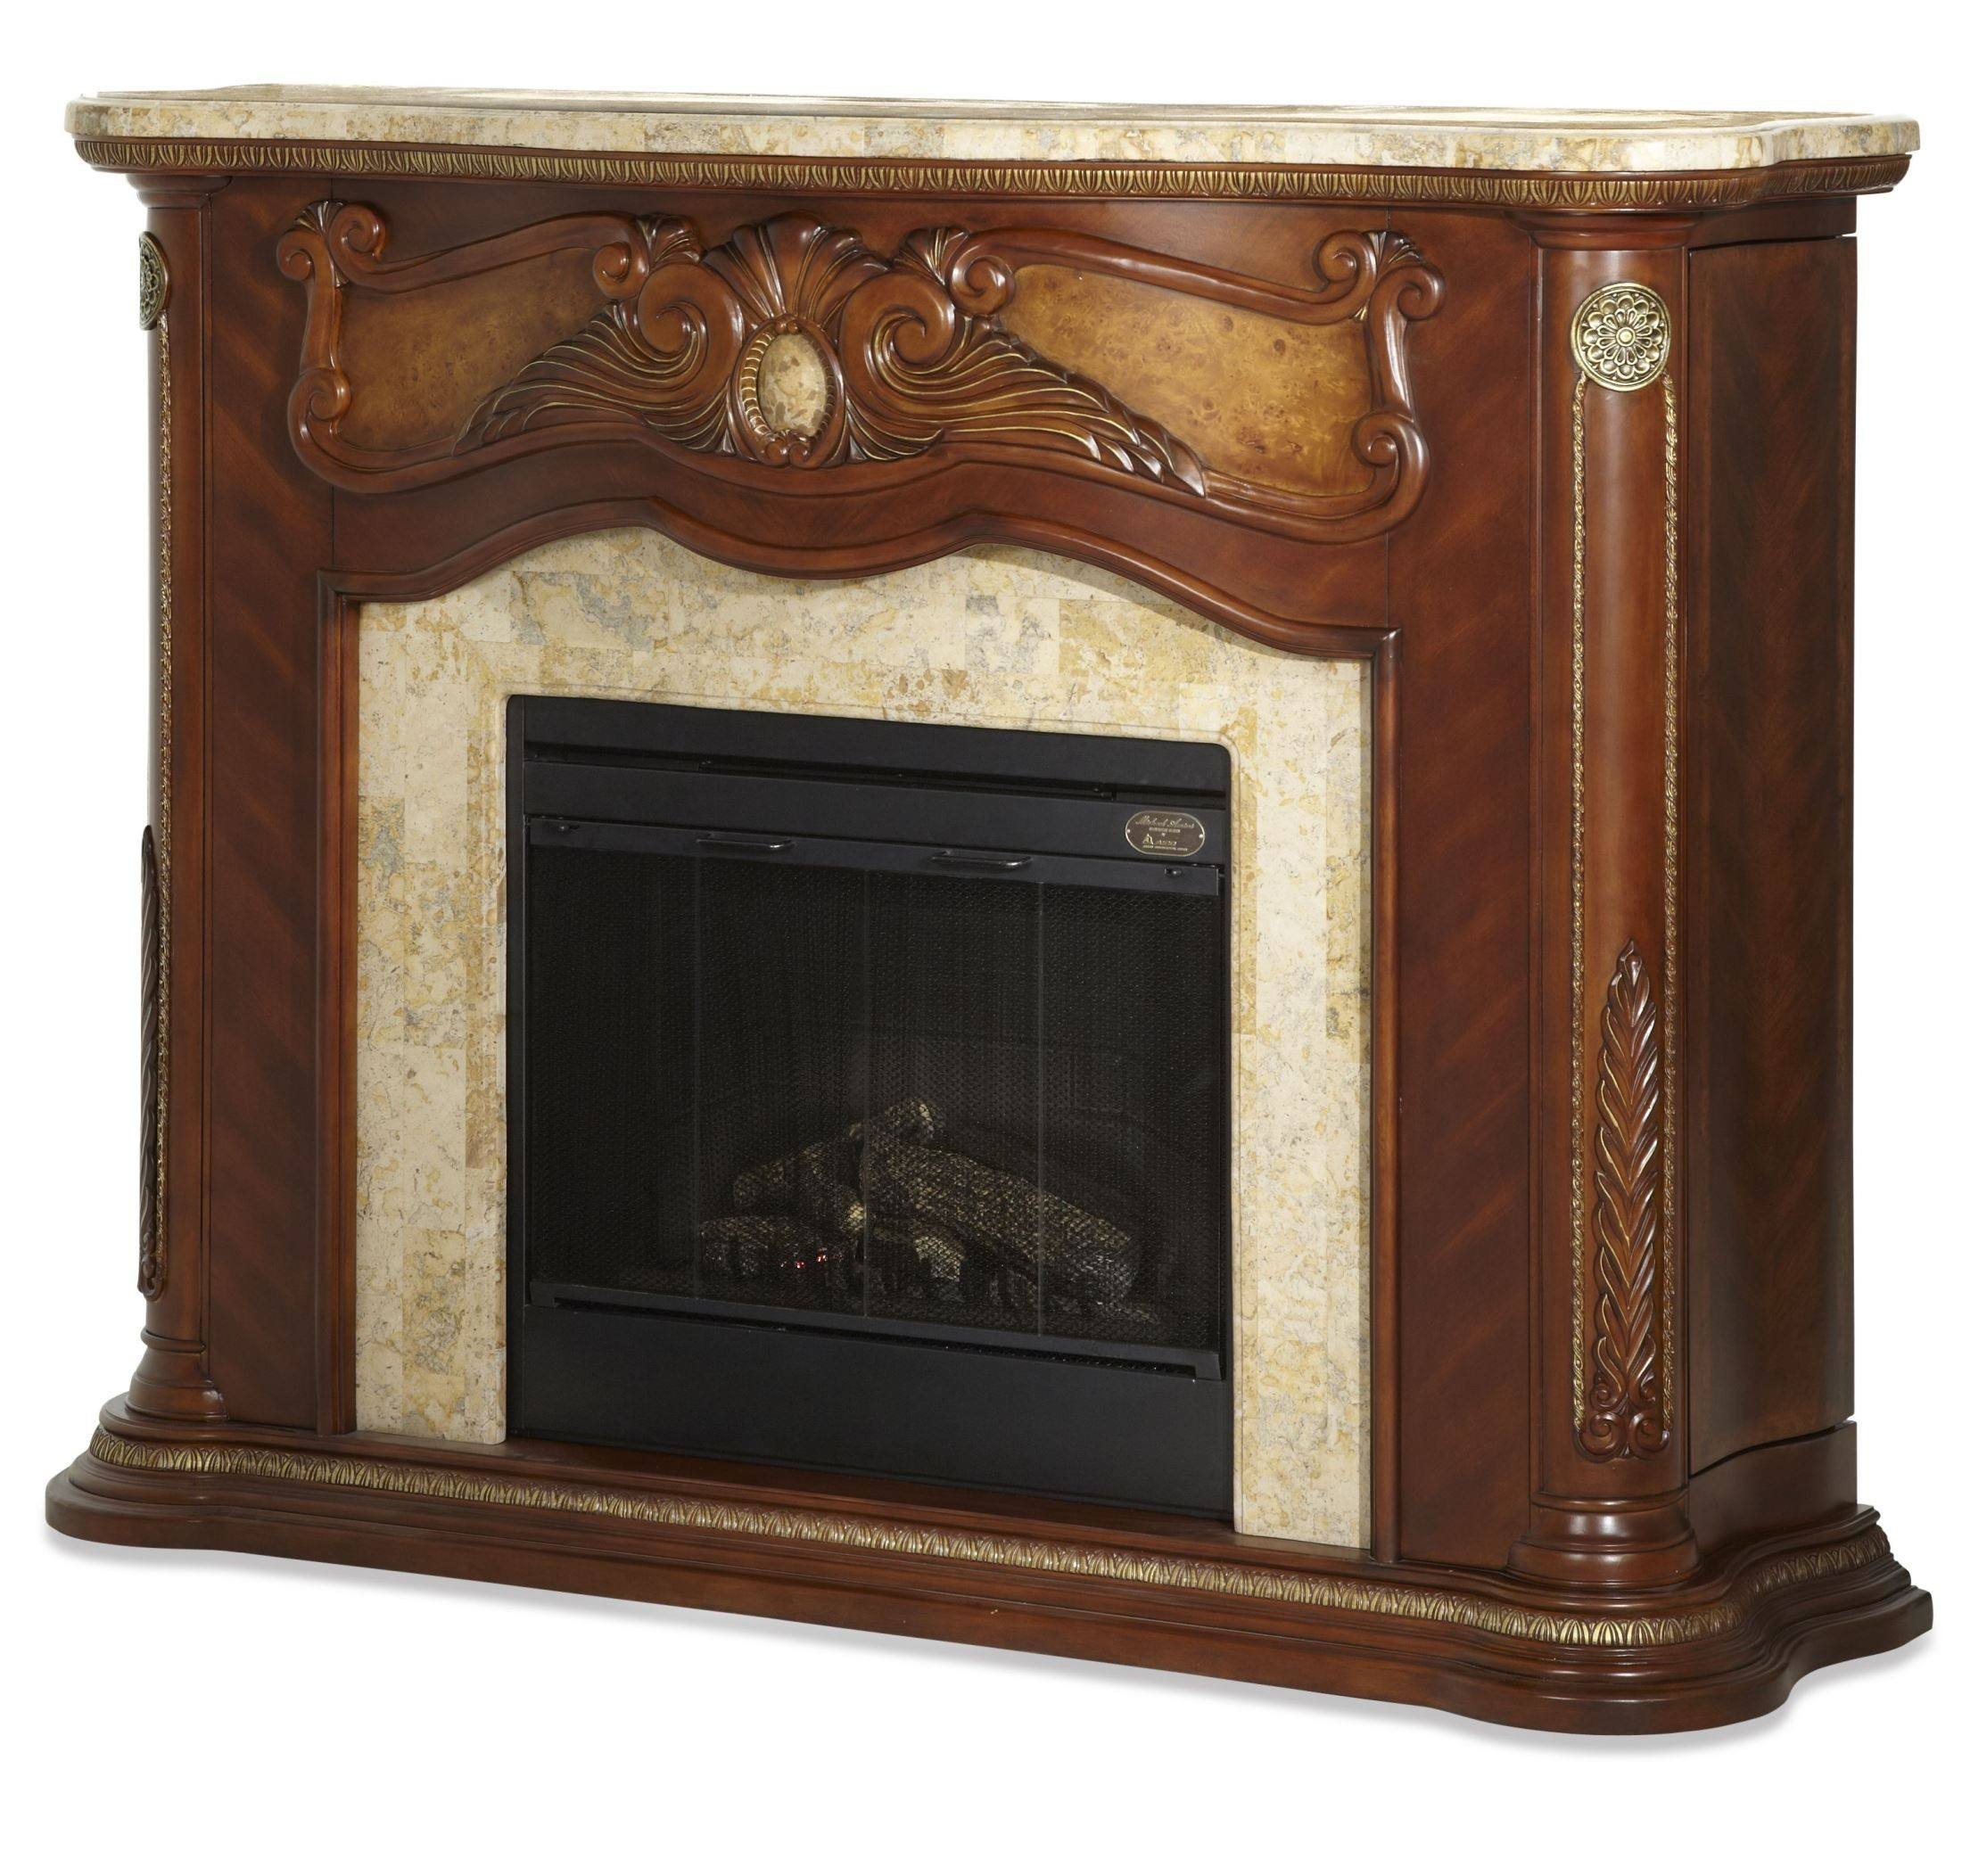 Electric Fireplace With Marble Top
 Cortina Marble Top Fireplace With Electric Fireplace